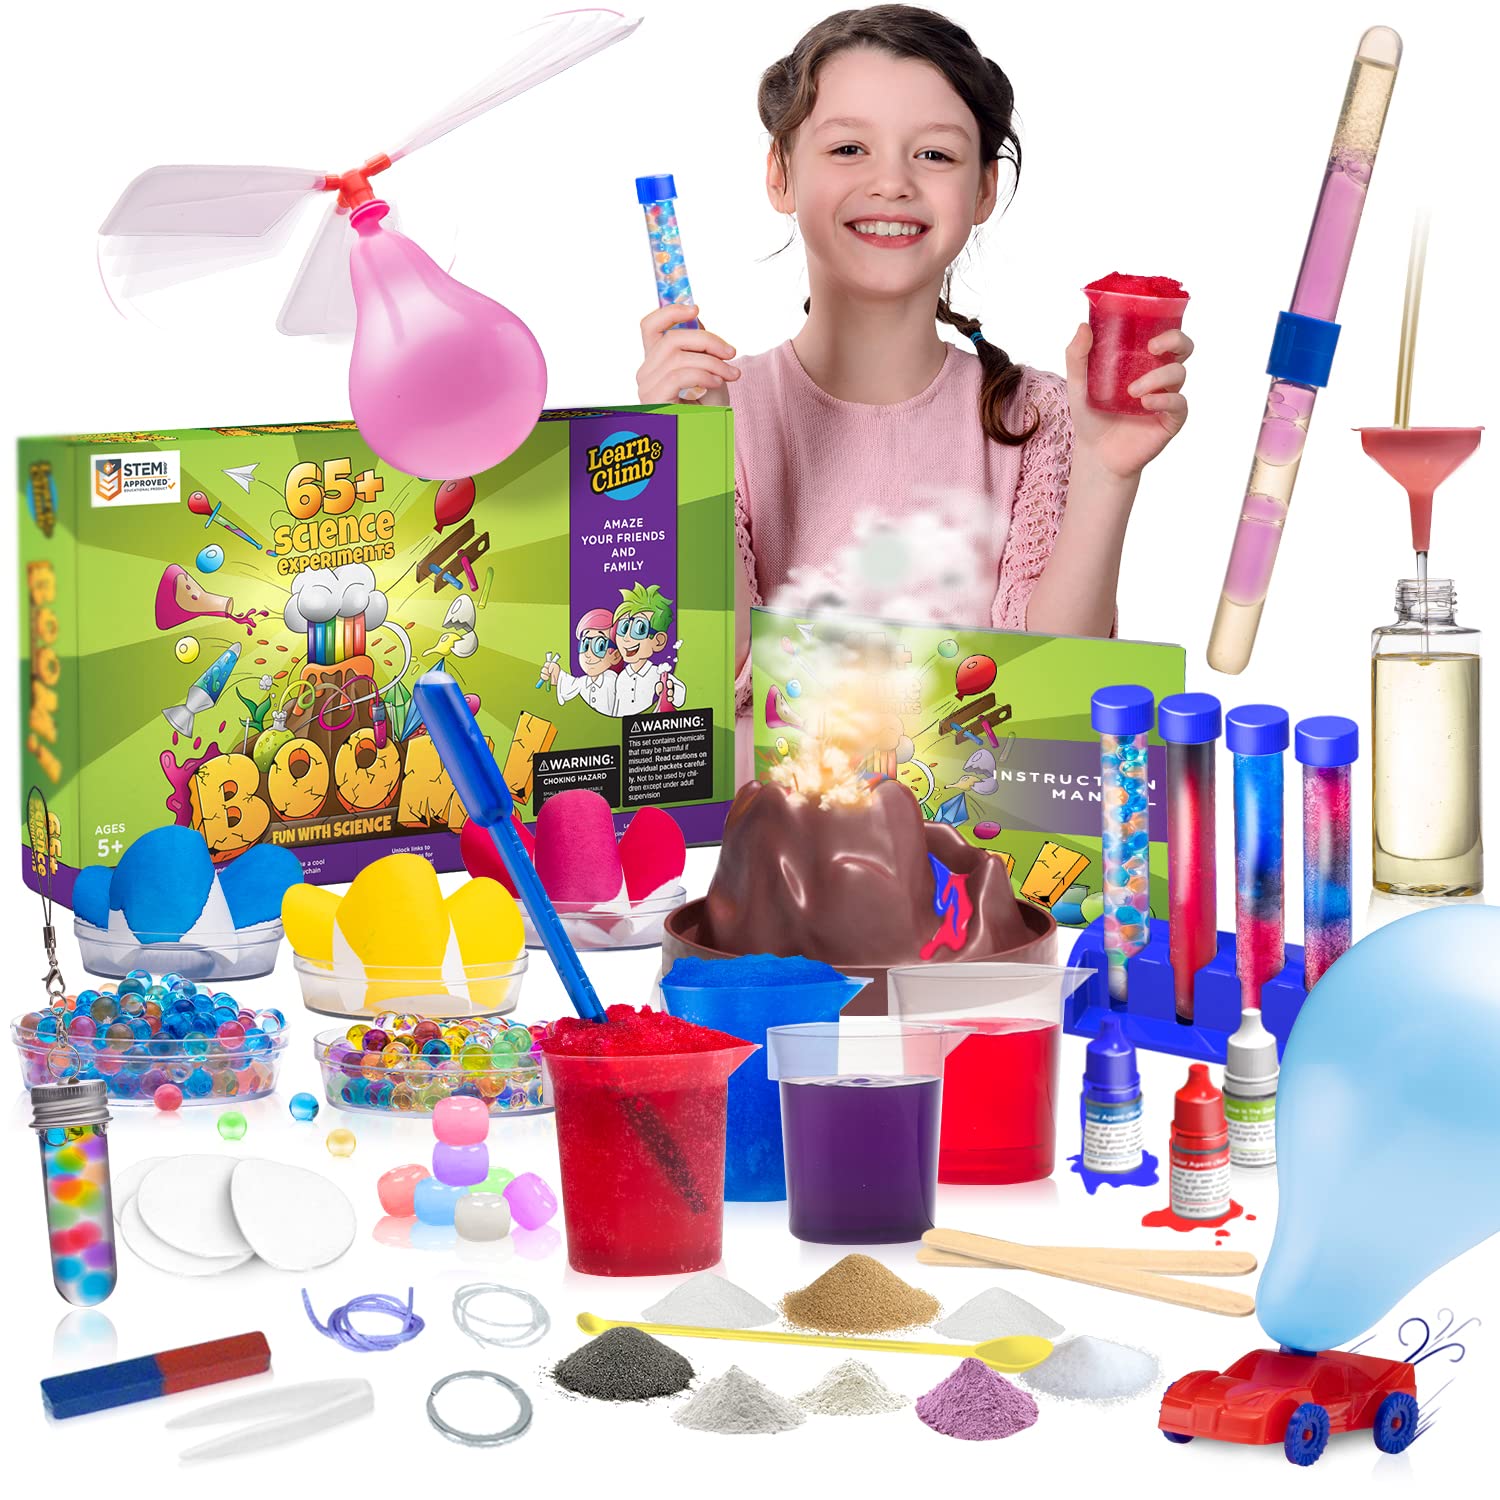 Learn & Climb [Sponsored]Kids Science Set - Over 60 Experiments Kit, How-To DVD